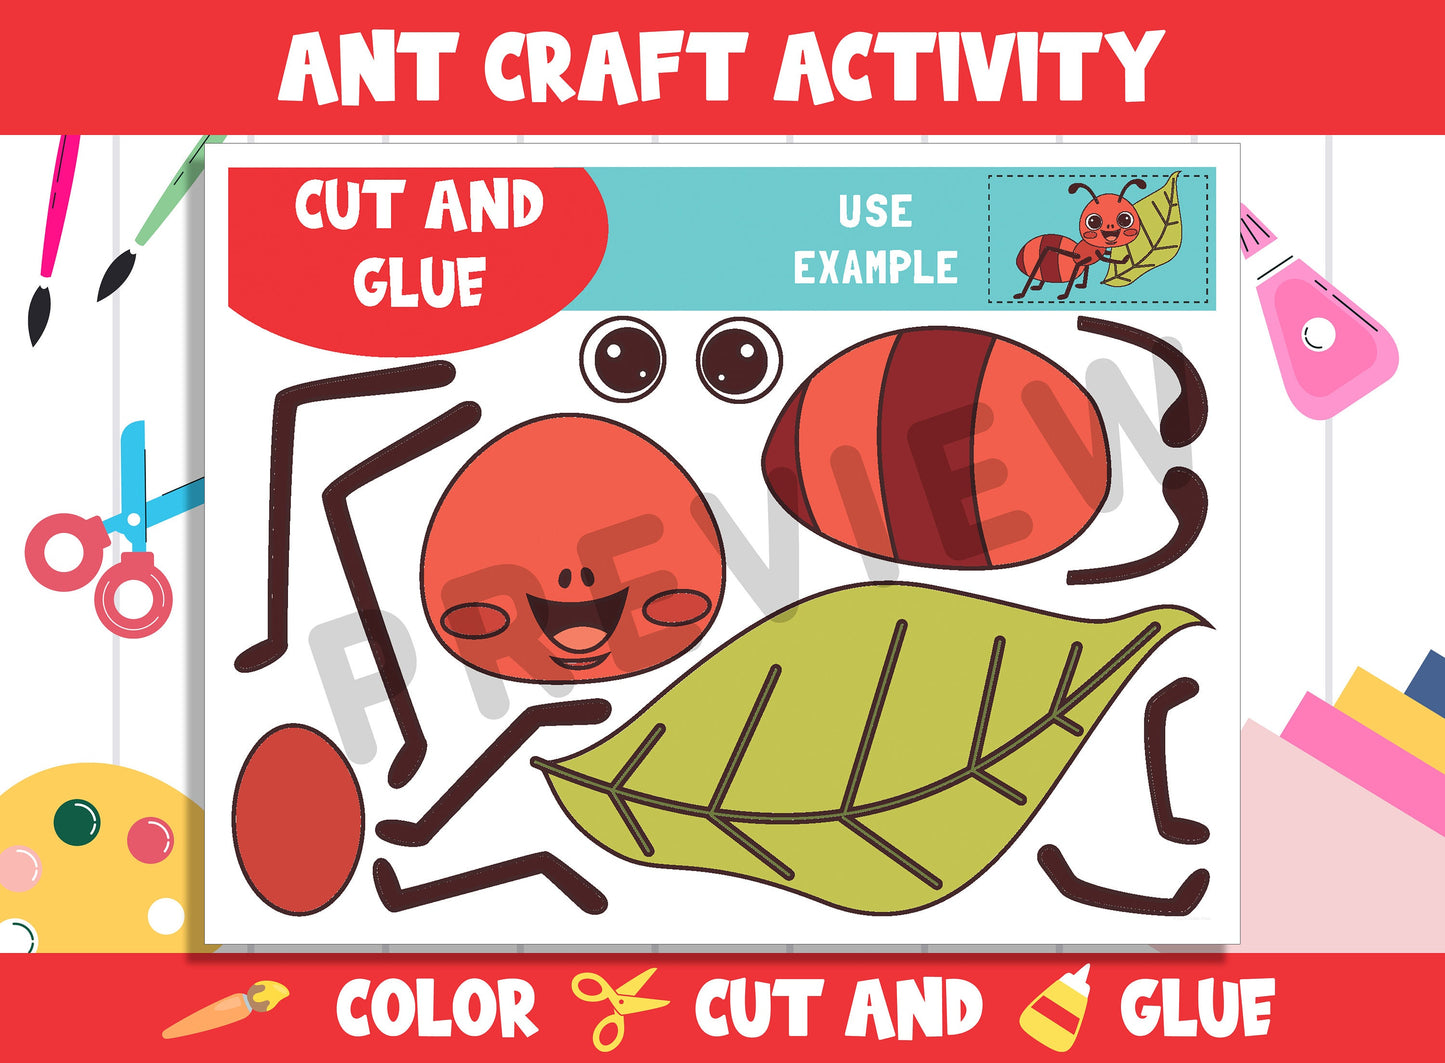 Cute Ant Craft Activity - Color, Cut, and Glue for PreK to 2nd Grade, PDF File, Instant Download